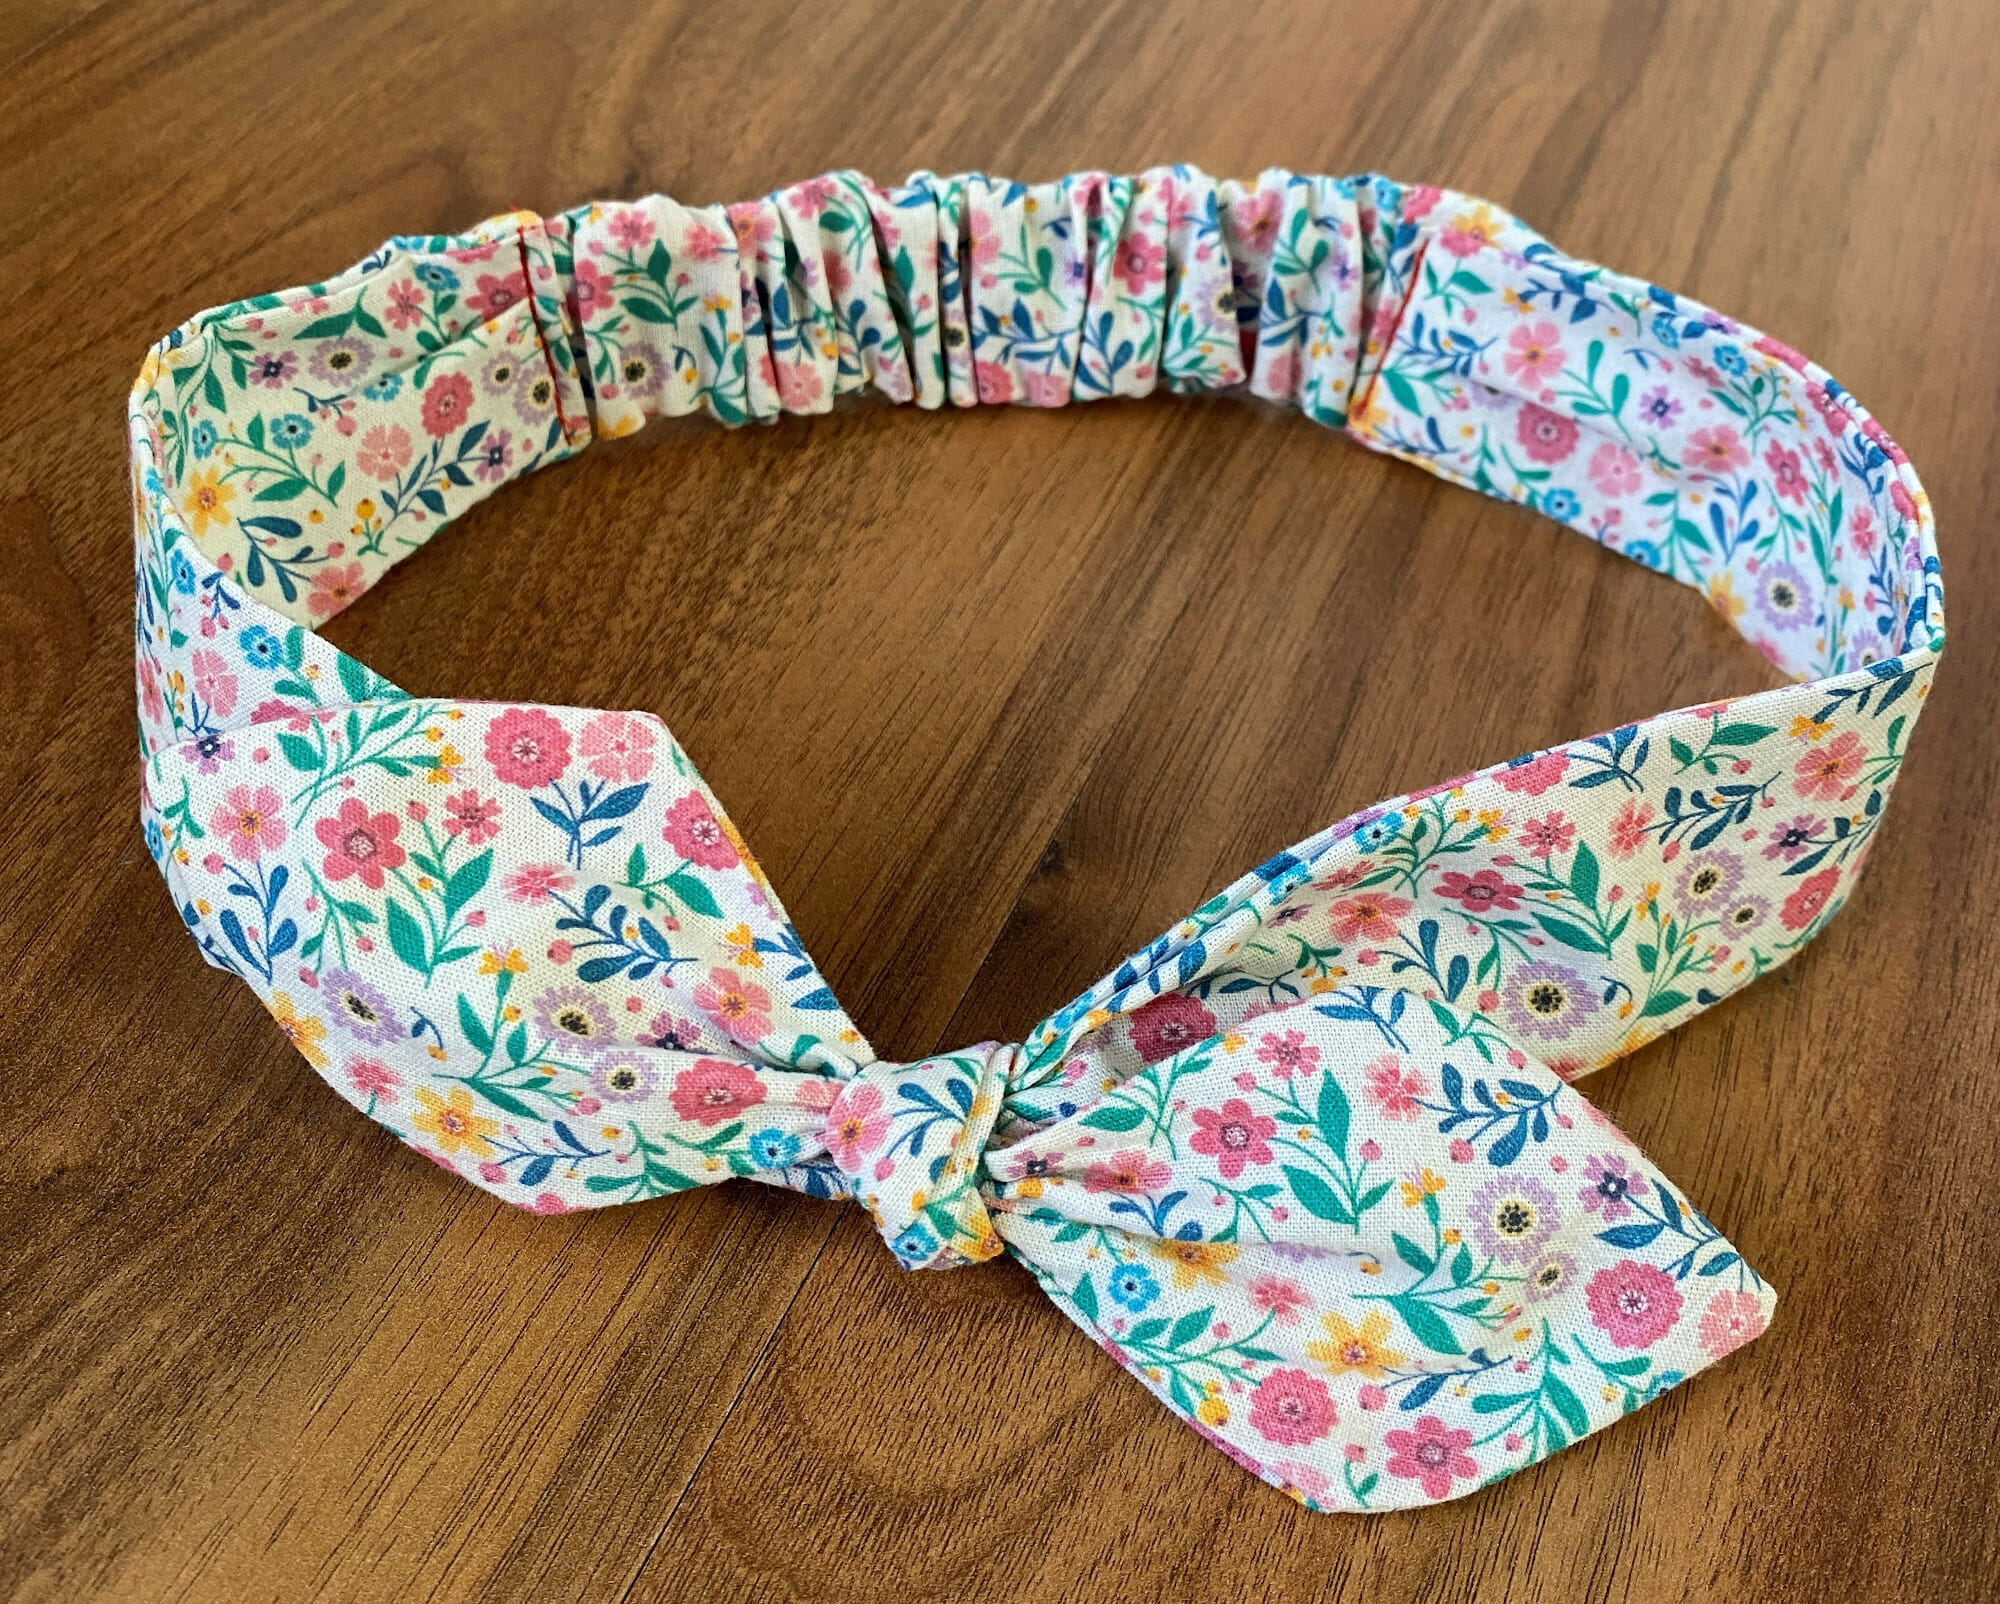 How to make a knotted headband. Free pattern & tutorial - I Can Sew This